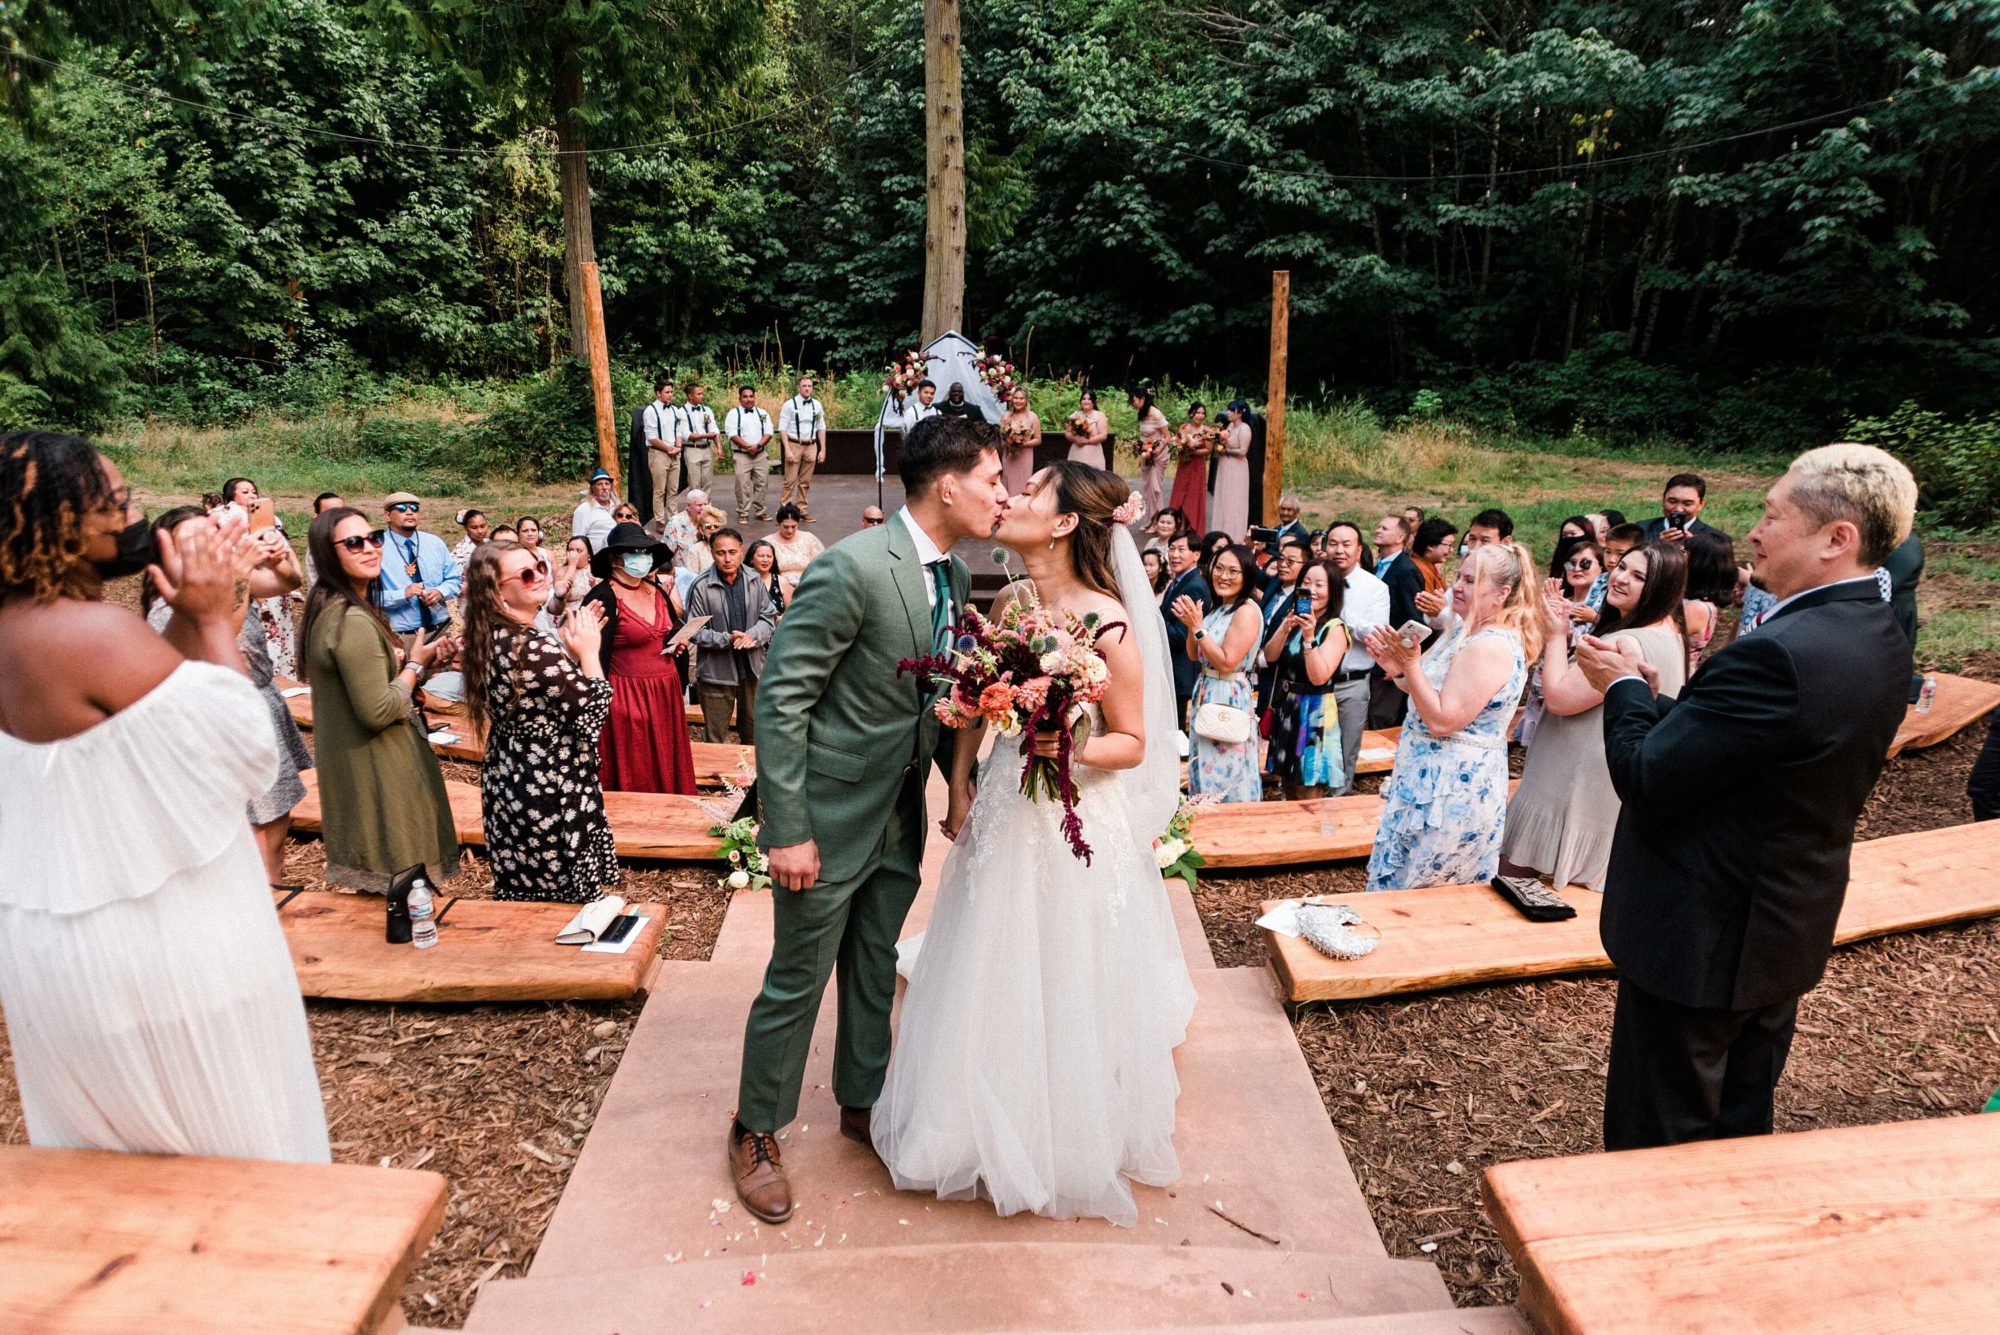 Wedding ceremony in the Moon Amphitheater at Misty Clover Farm Olympic Peninsula Wedding Venue